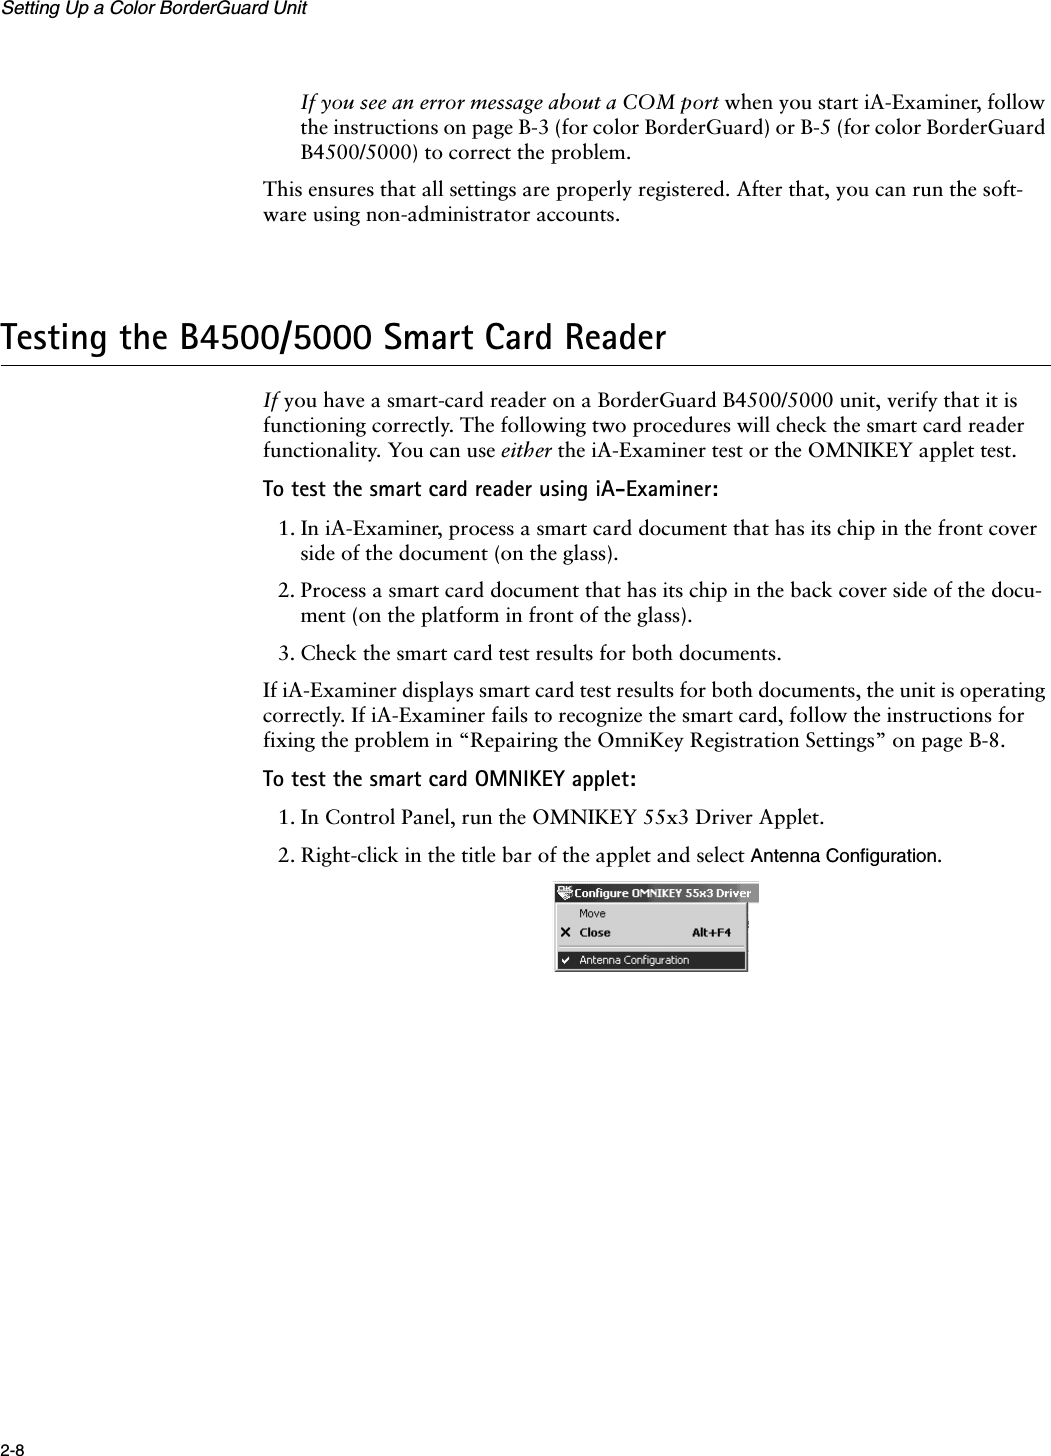 Setting Up a Color BorderGuard Unit2-8If you see an error message about a COM port when you start iA-Examiner, follow the instructions on page B-3 (for color BorderGuard) or B-5 (for color BorderGuard B4500/5000) to correct the problem.This ensures that all settings are properly registered. After that, you can run the soft-ware using non-administrator accounts.Testing the B4500/5000 Smart Card ReaderIf you have a smart-card reader on a BorderGuard B4500/5000 unit, verify that it is functioning correctly. The following two procedures will check the smart card reader functionality. You can use either the iA-Examiner test or the OMNIKEY applet test.To test the smart card reader using iA-Examiner:1. In iA-Examiner, process a smart card document that has its chip in the front cover side of the document (on the glass).2. Process a smart card document that has its chip in the back cover side of the docu-ment (on the platform in front of the glass).3. Check the smart card test results for both documents.If iA-Examiner displays smart card test results for both documents, the unit is operating correctly. If iA-Examiner fails to recognize the smart card, follow the instructions for fixing the problem in “Repairing the OmniKey Registration Settings” on page B-8.To test the smart card OMNIKEY applet:1. In Control Panel, run the OMNIKEY 55x3 Driver Applet.2. Right-click in the title bar of the applet and select Antenna Configuration.